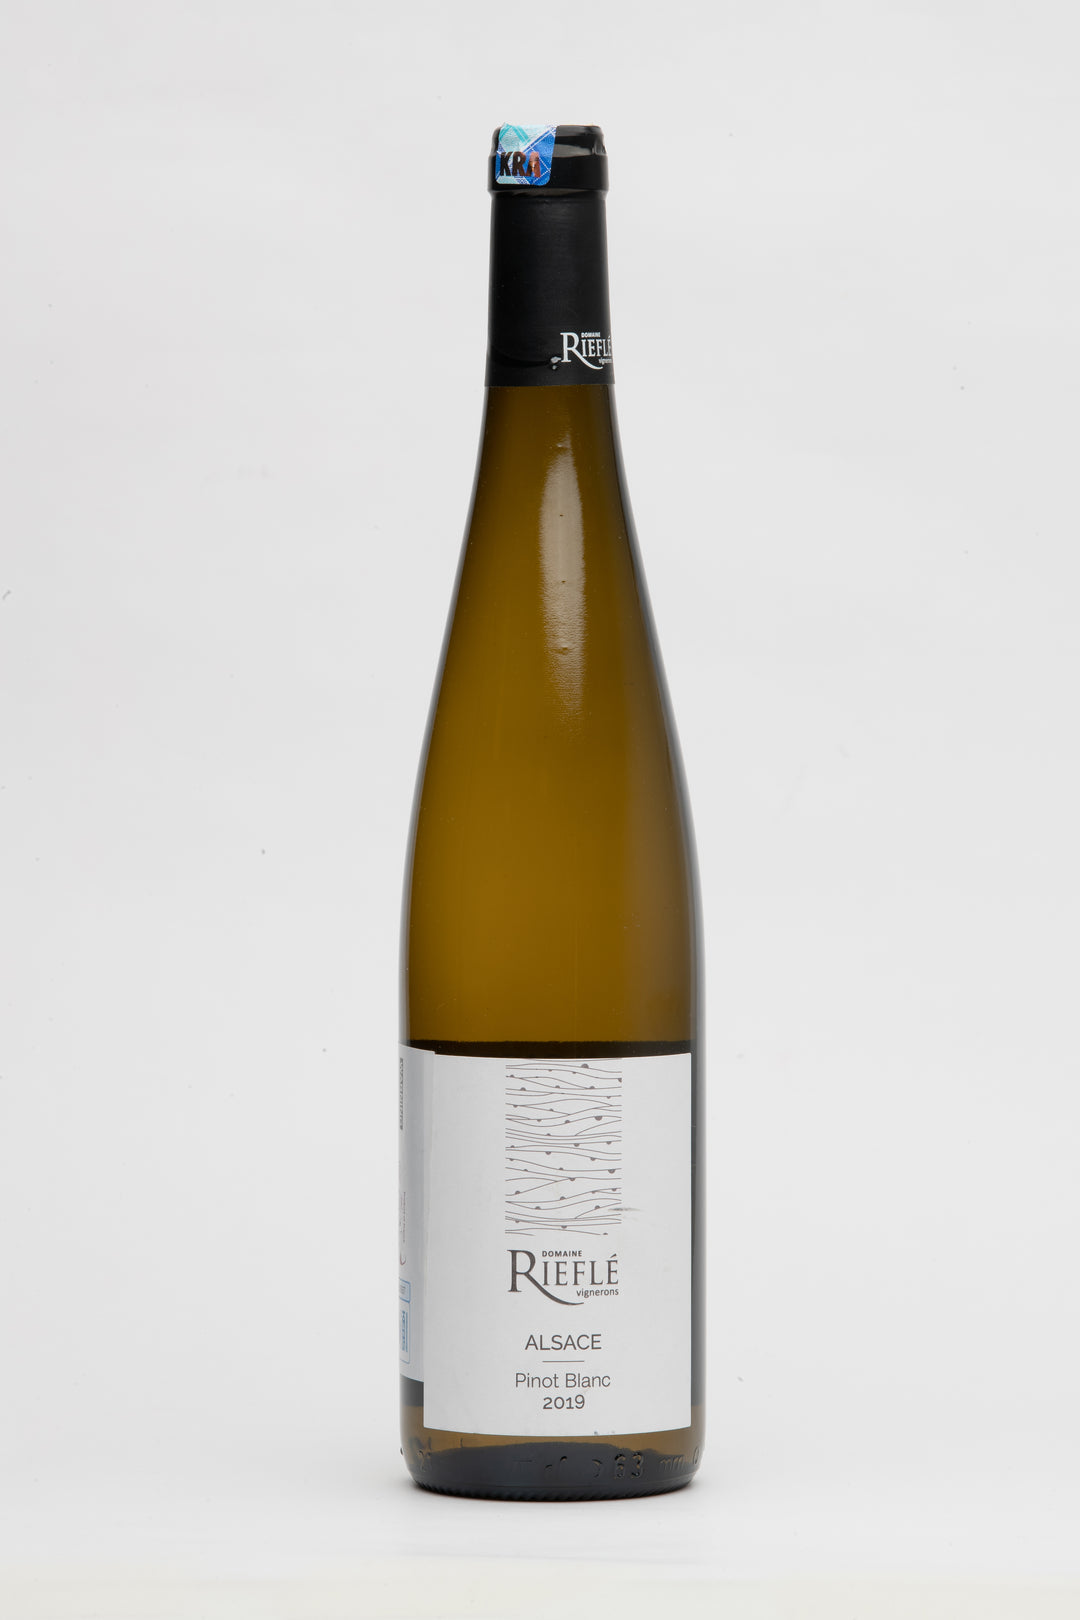 Domaine Riefle Pinot Blanc